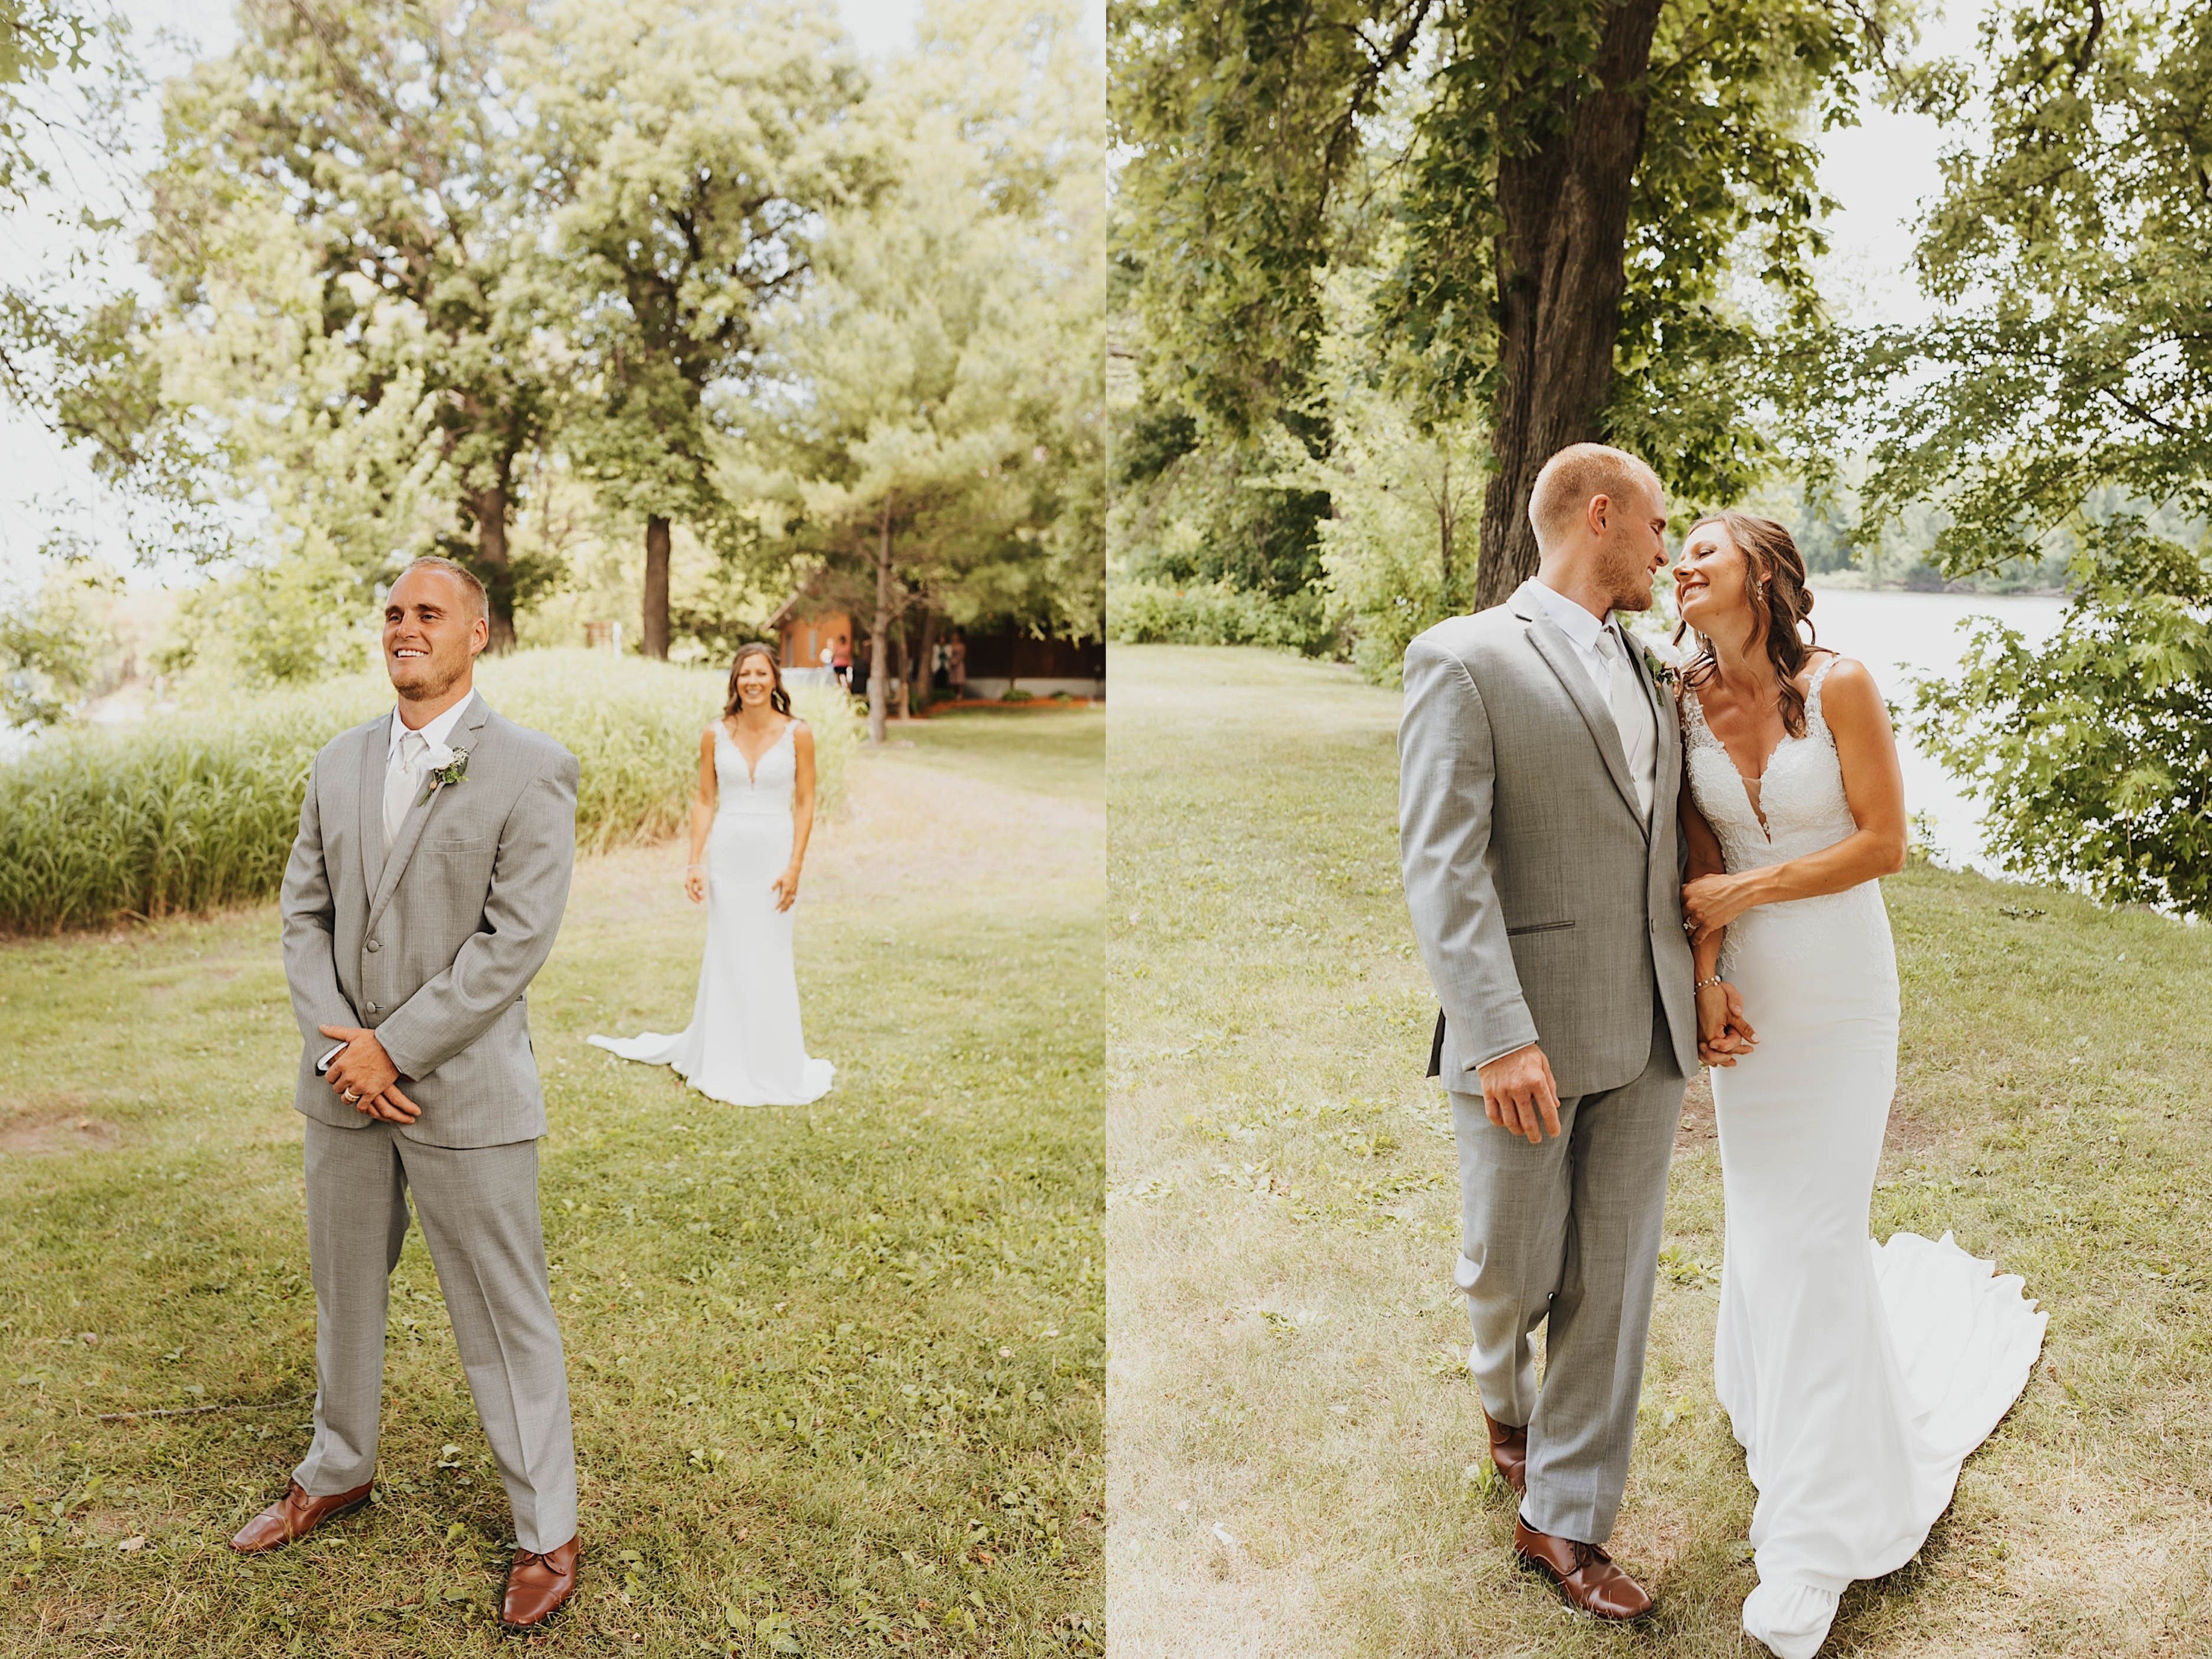 2 photos side by side, the left photo is of a bride walking up to the groom from behind, the right is the two walking hand in hand